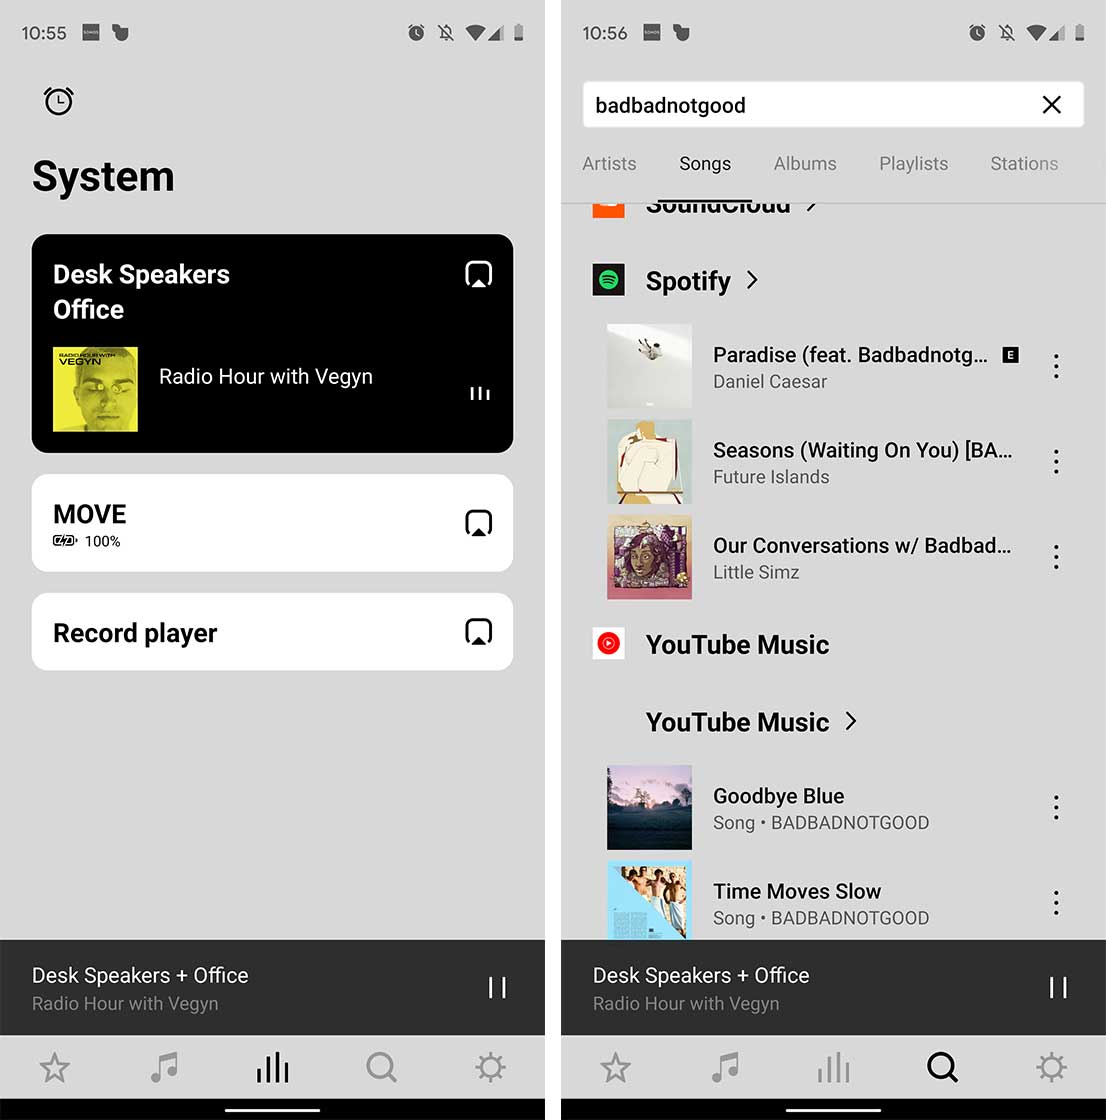 Exert harmonisk tøj The new Sonos S2 app is now available to download